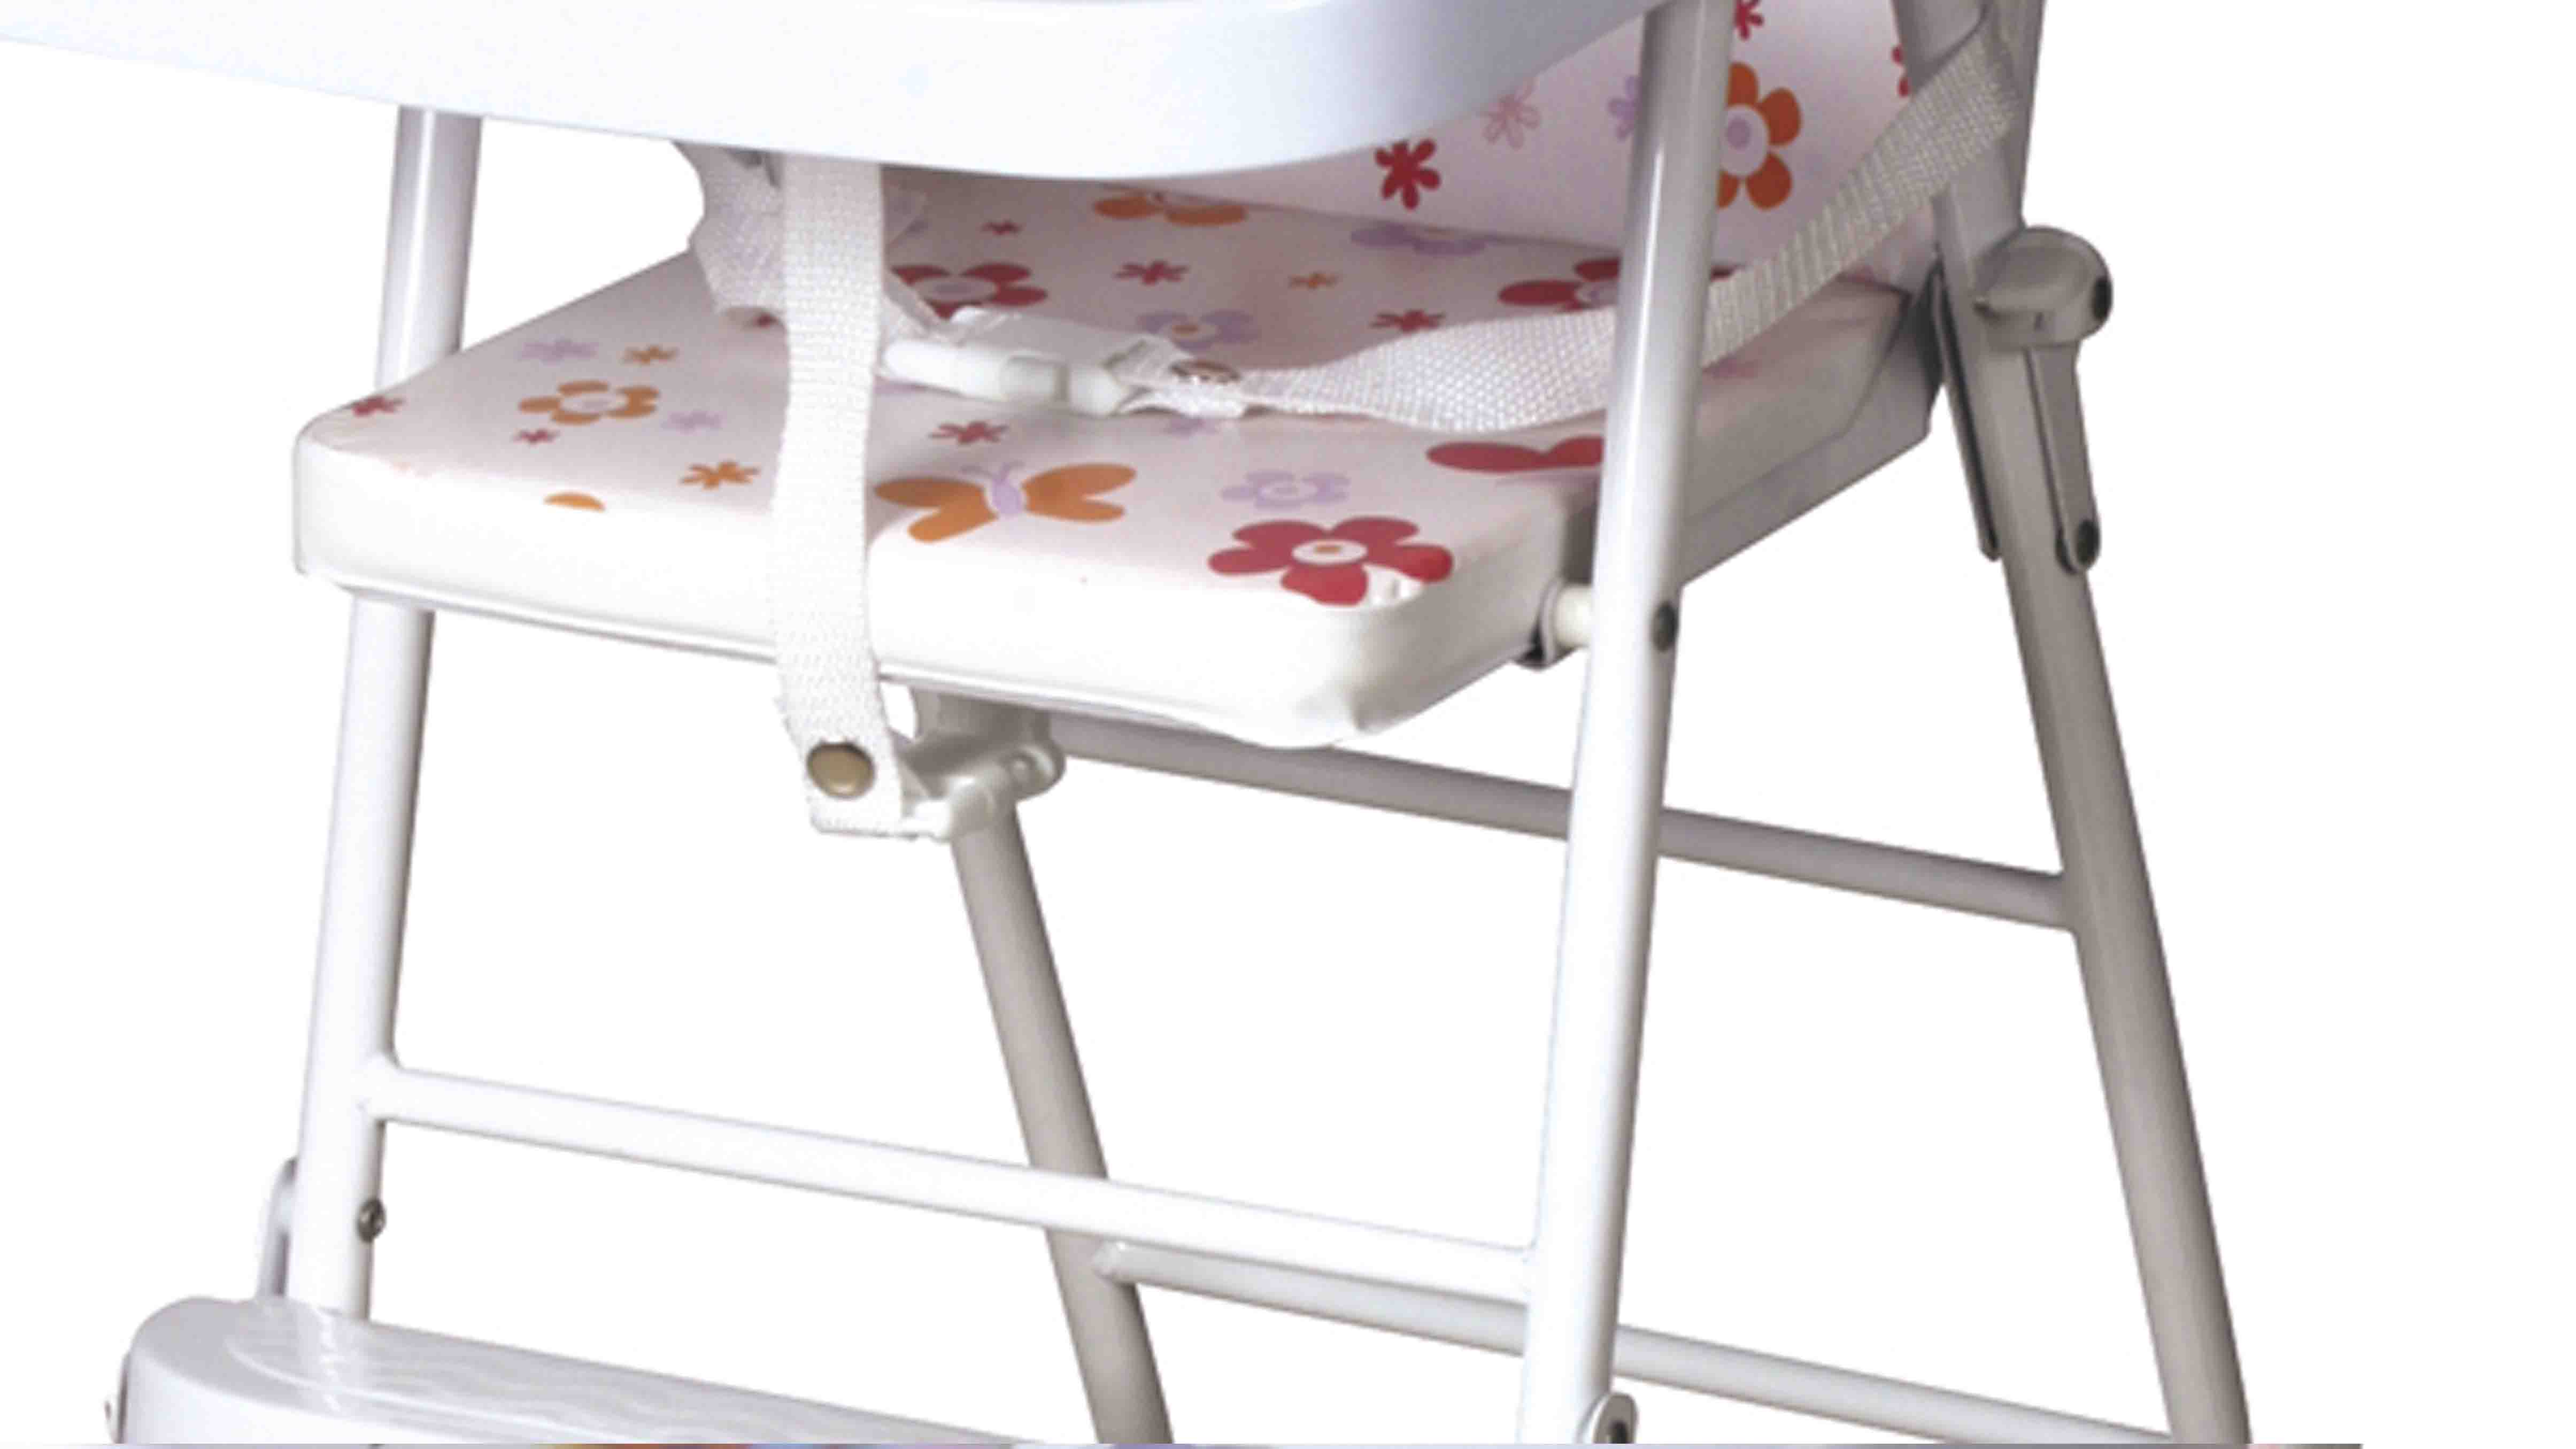 Aoqi dining folding baby high chair directly sale for home